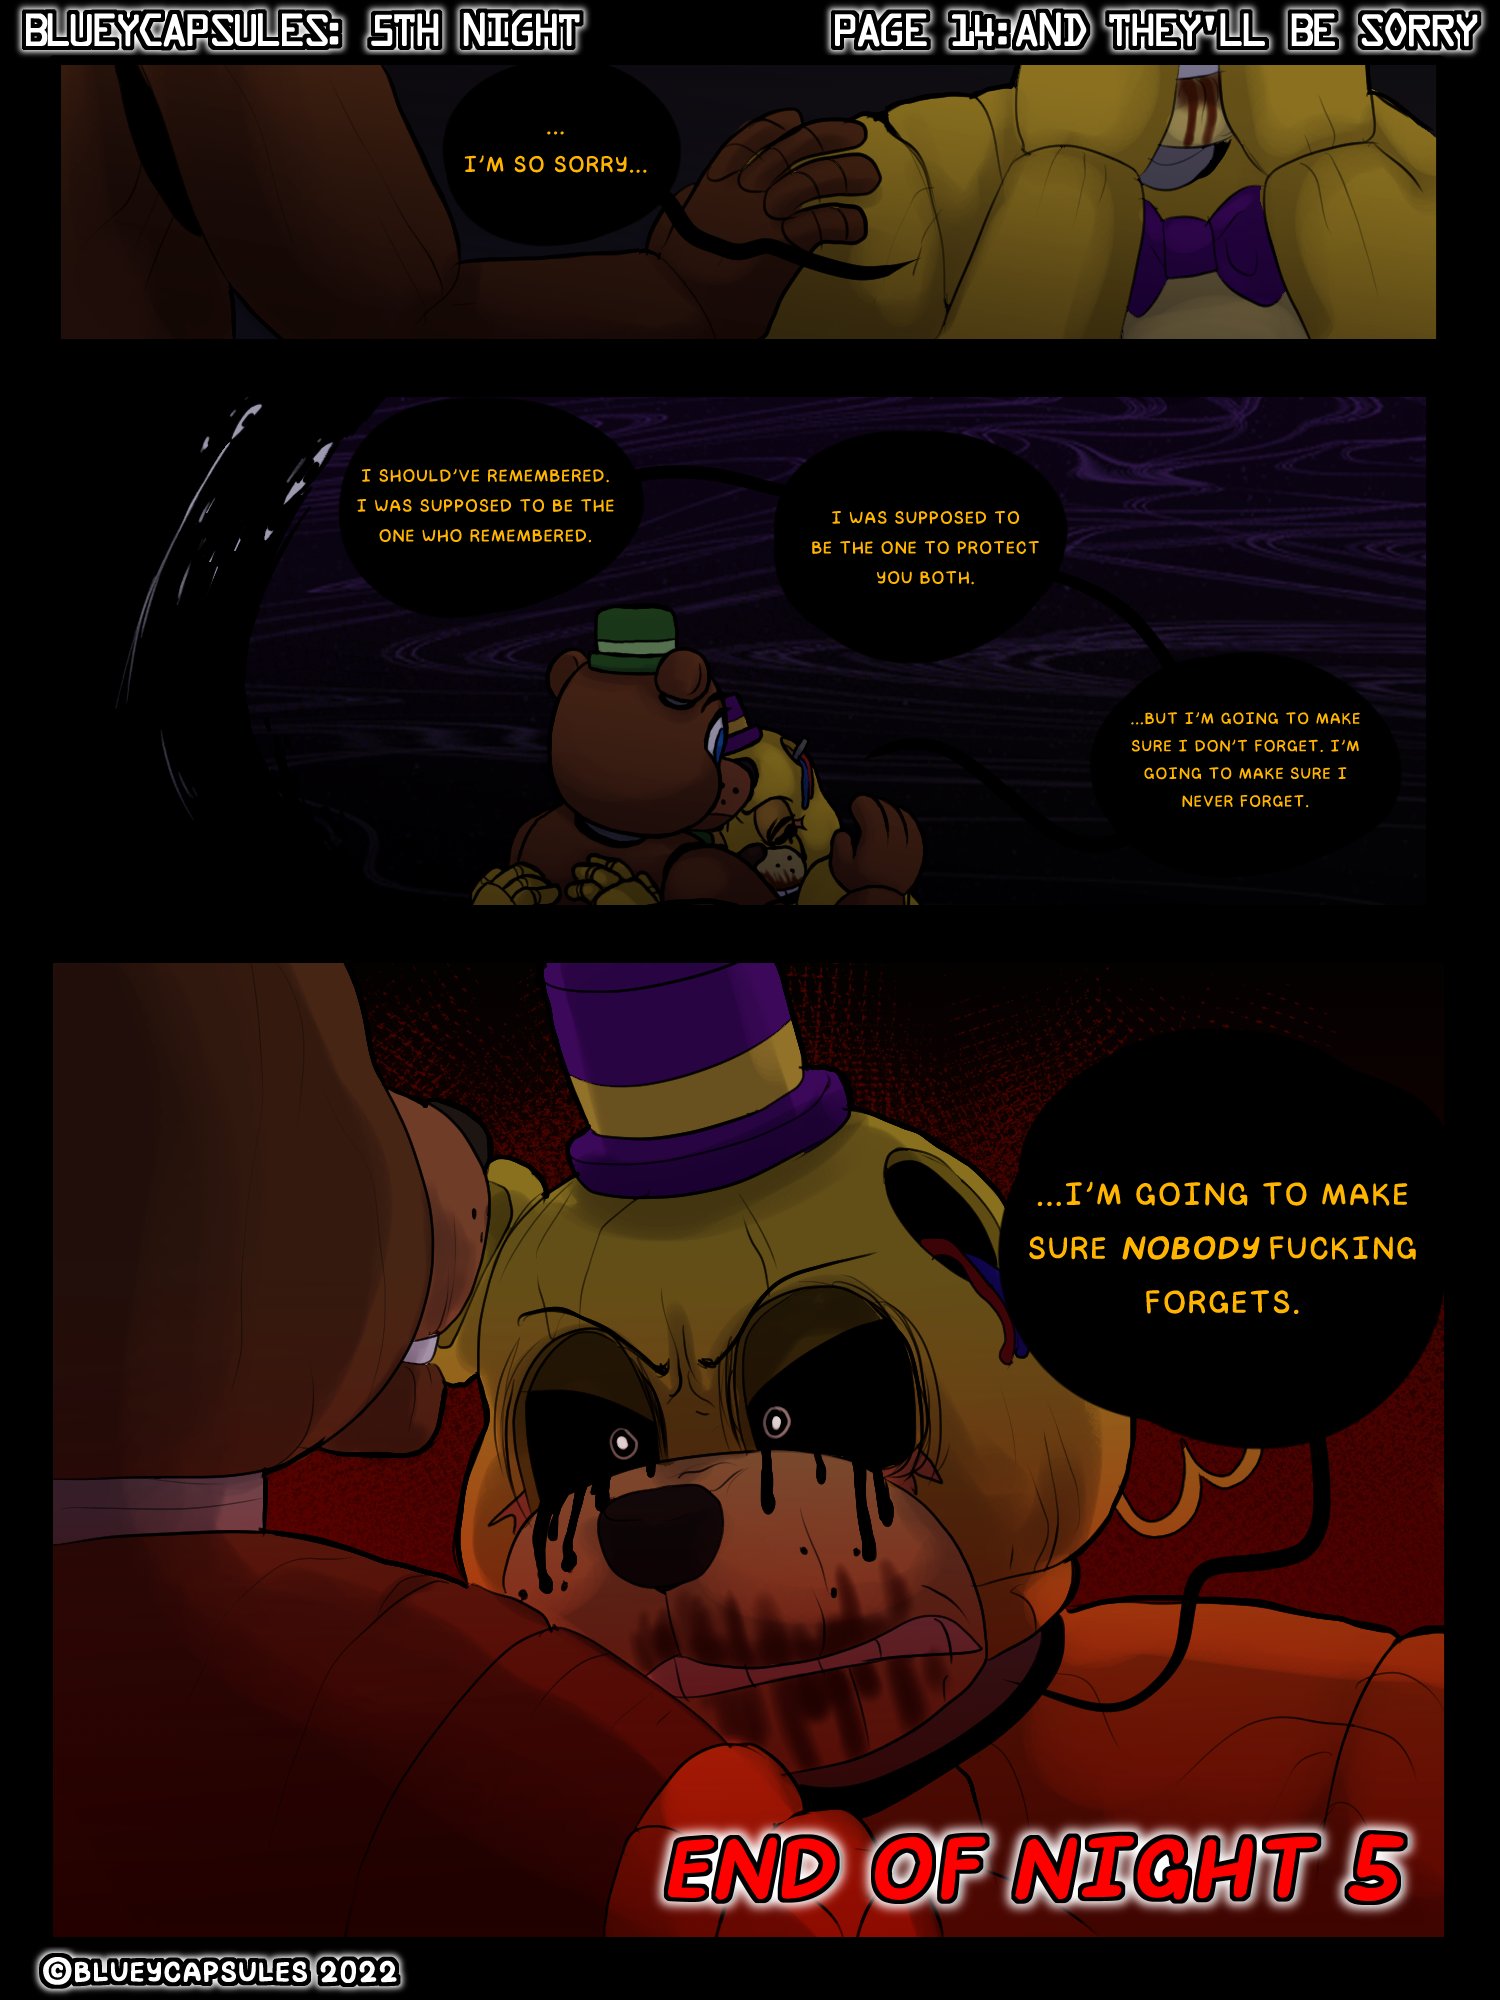 Bluey Capsules on X: Don't forget what you did. #FNAF   / X